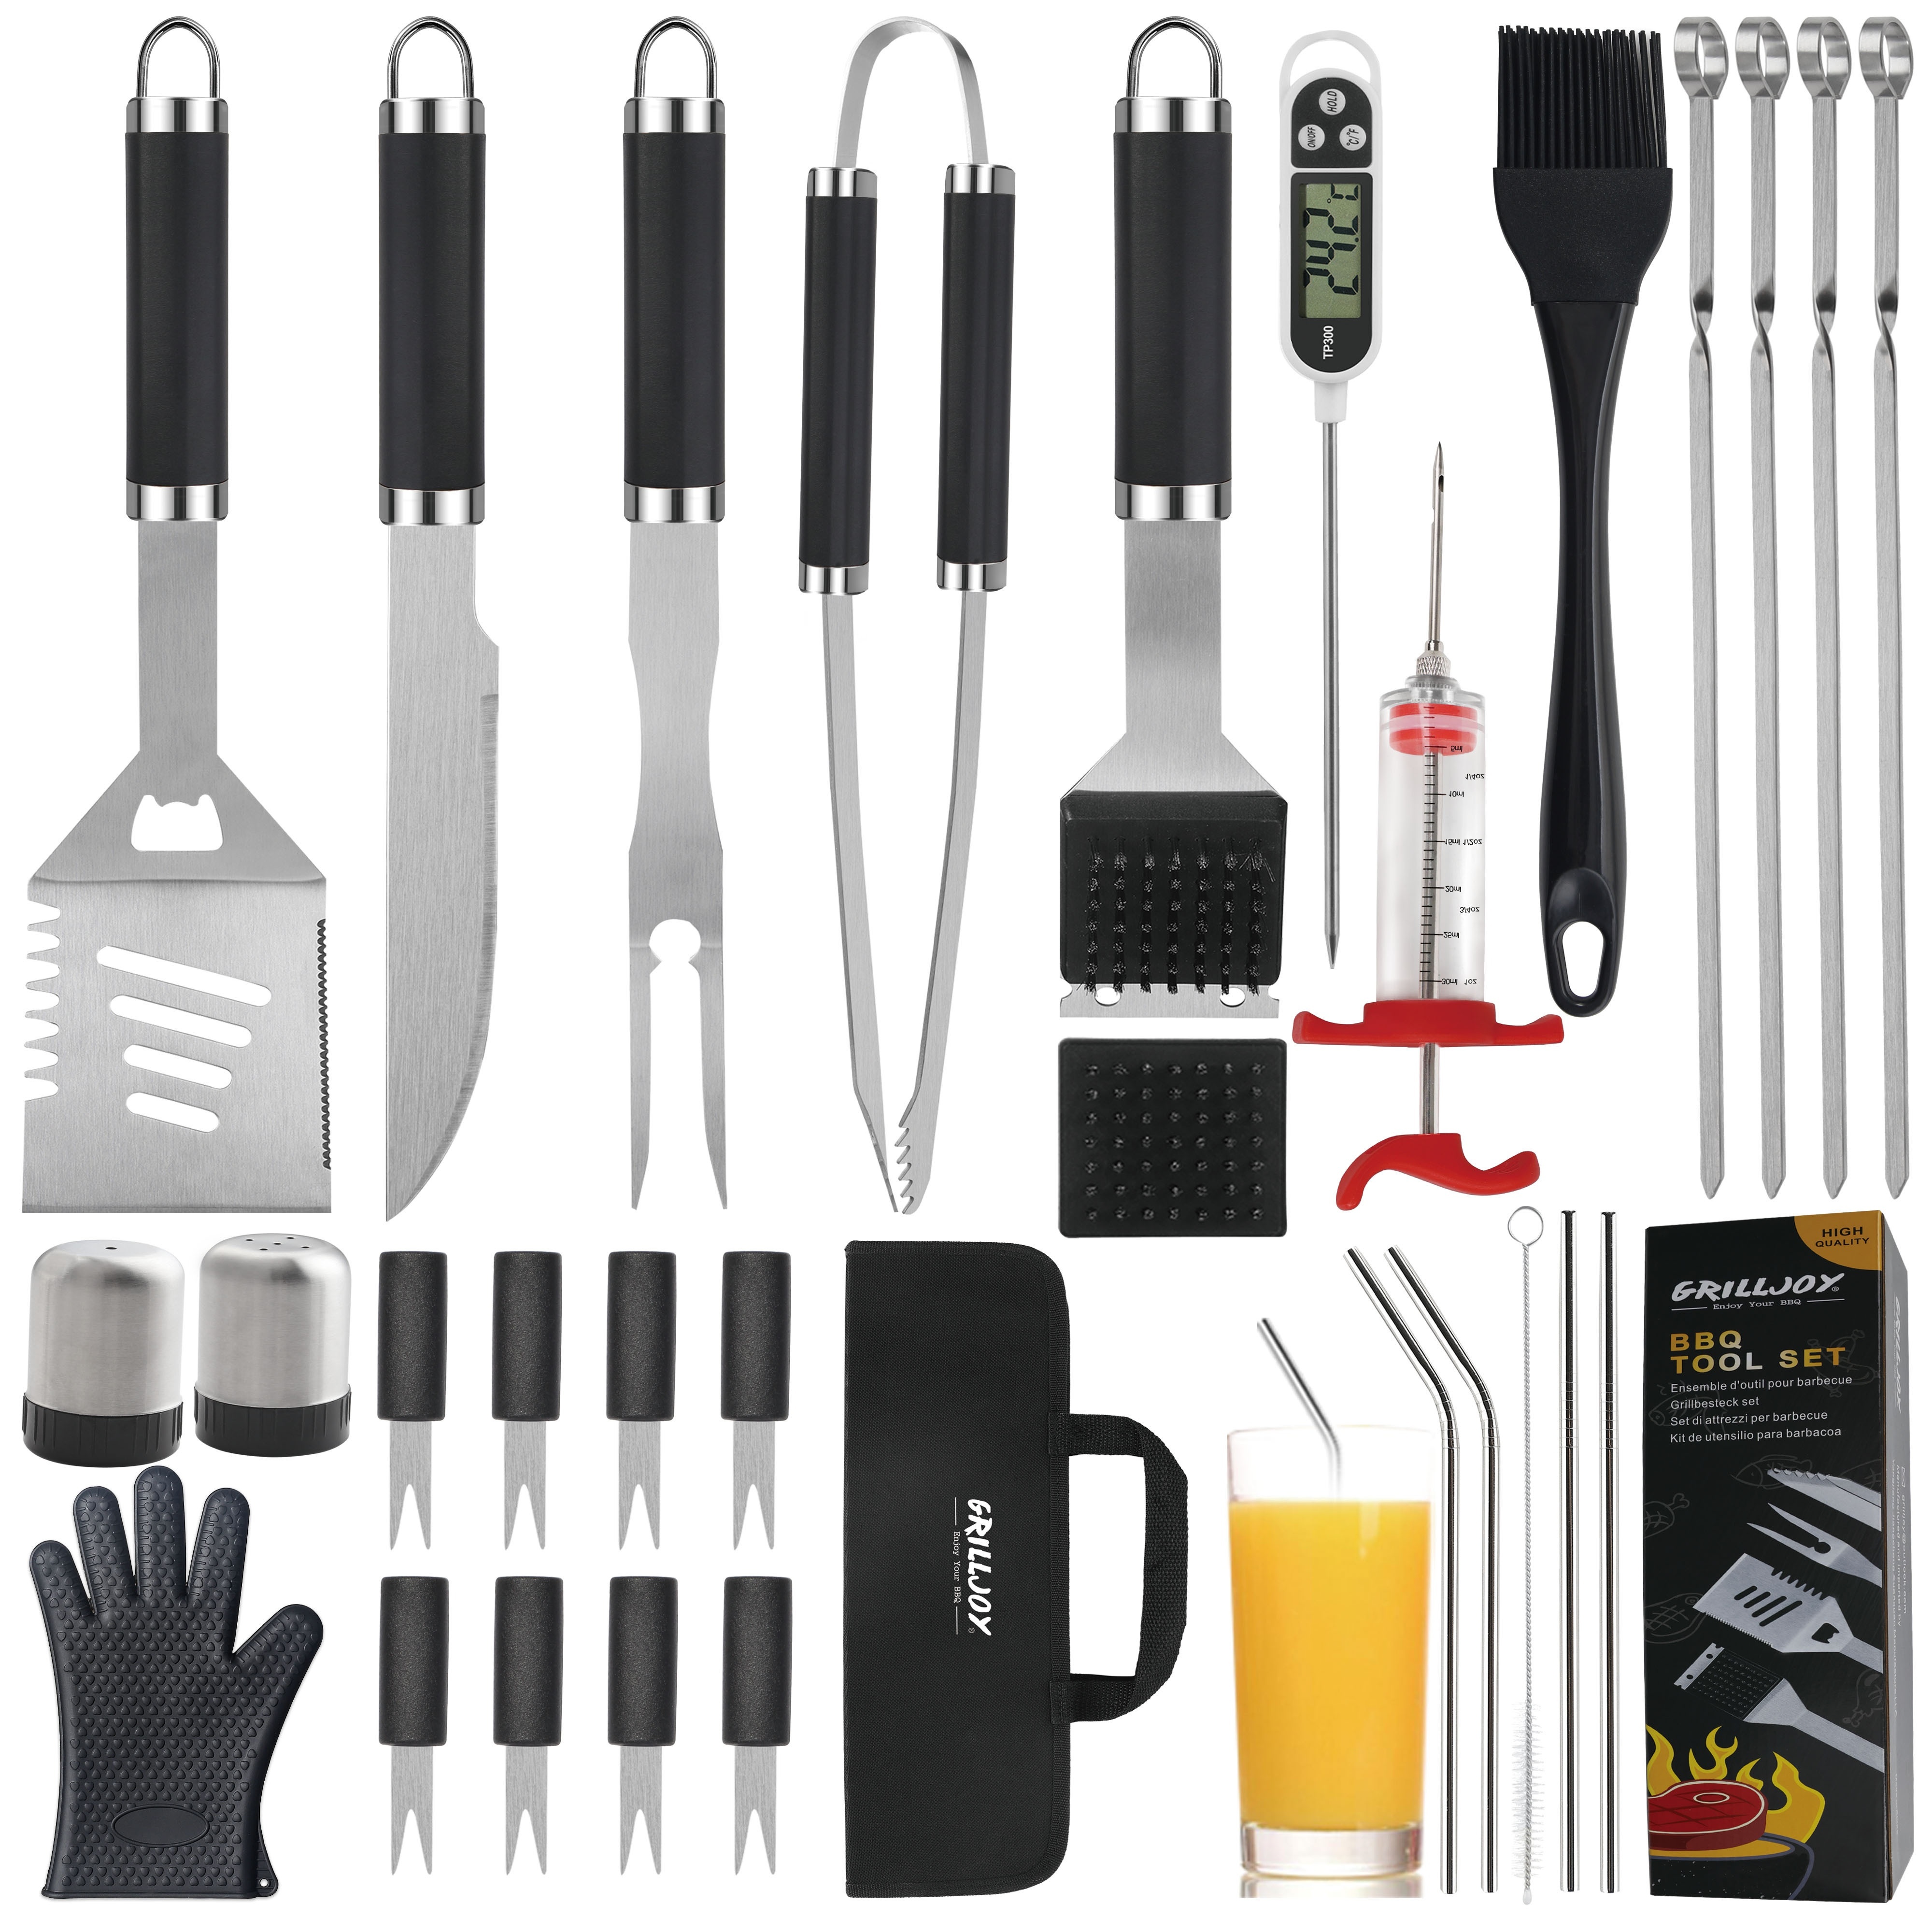 ROMANTICIST 25pcs Extra Thick Stainless Steel Grill Tool Set for Men, Heavy  Duty Grilling Accessories Kit for Backyard, BBQ Utensils Gift Set with